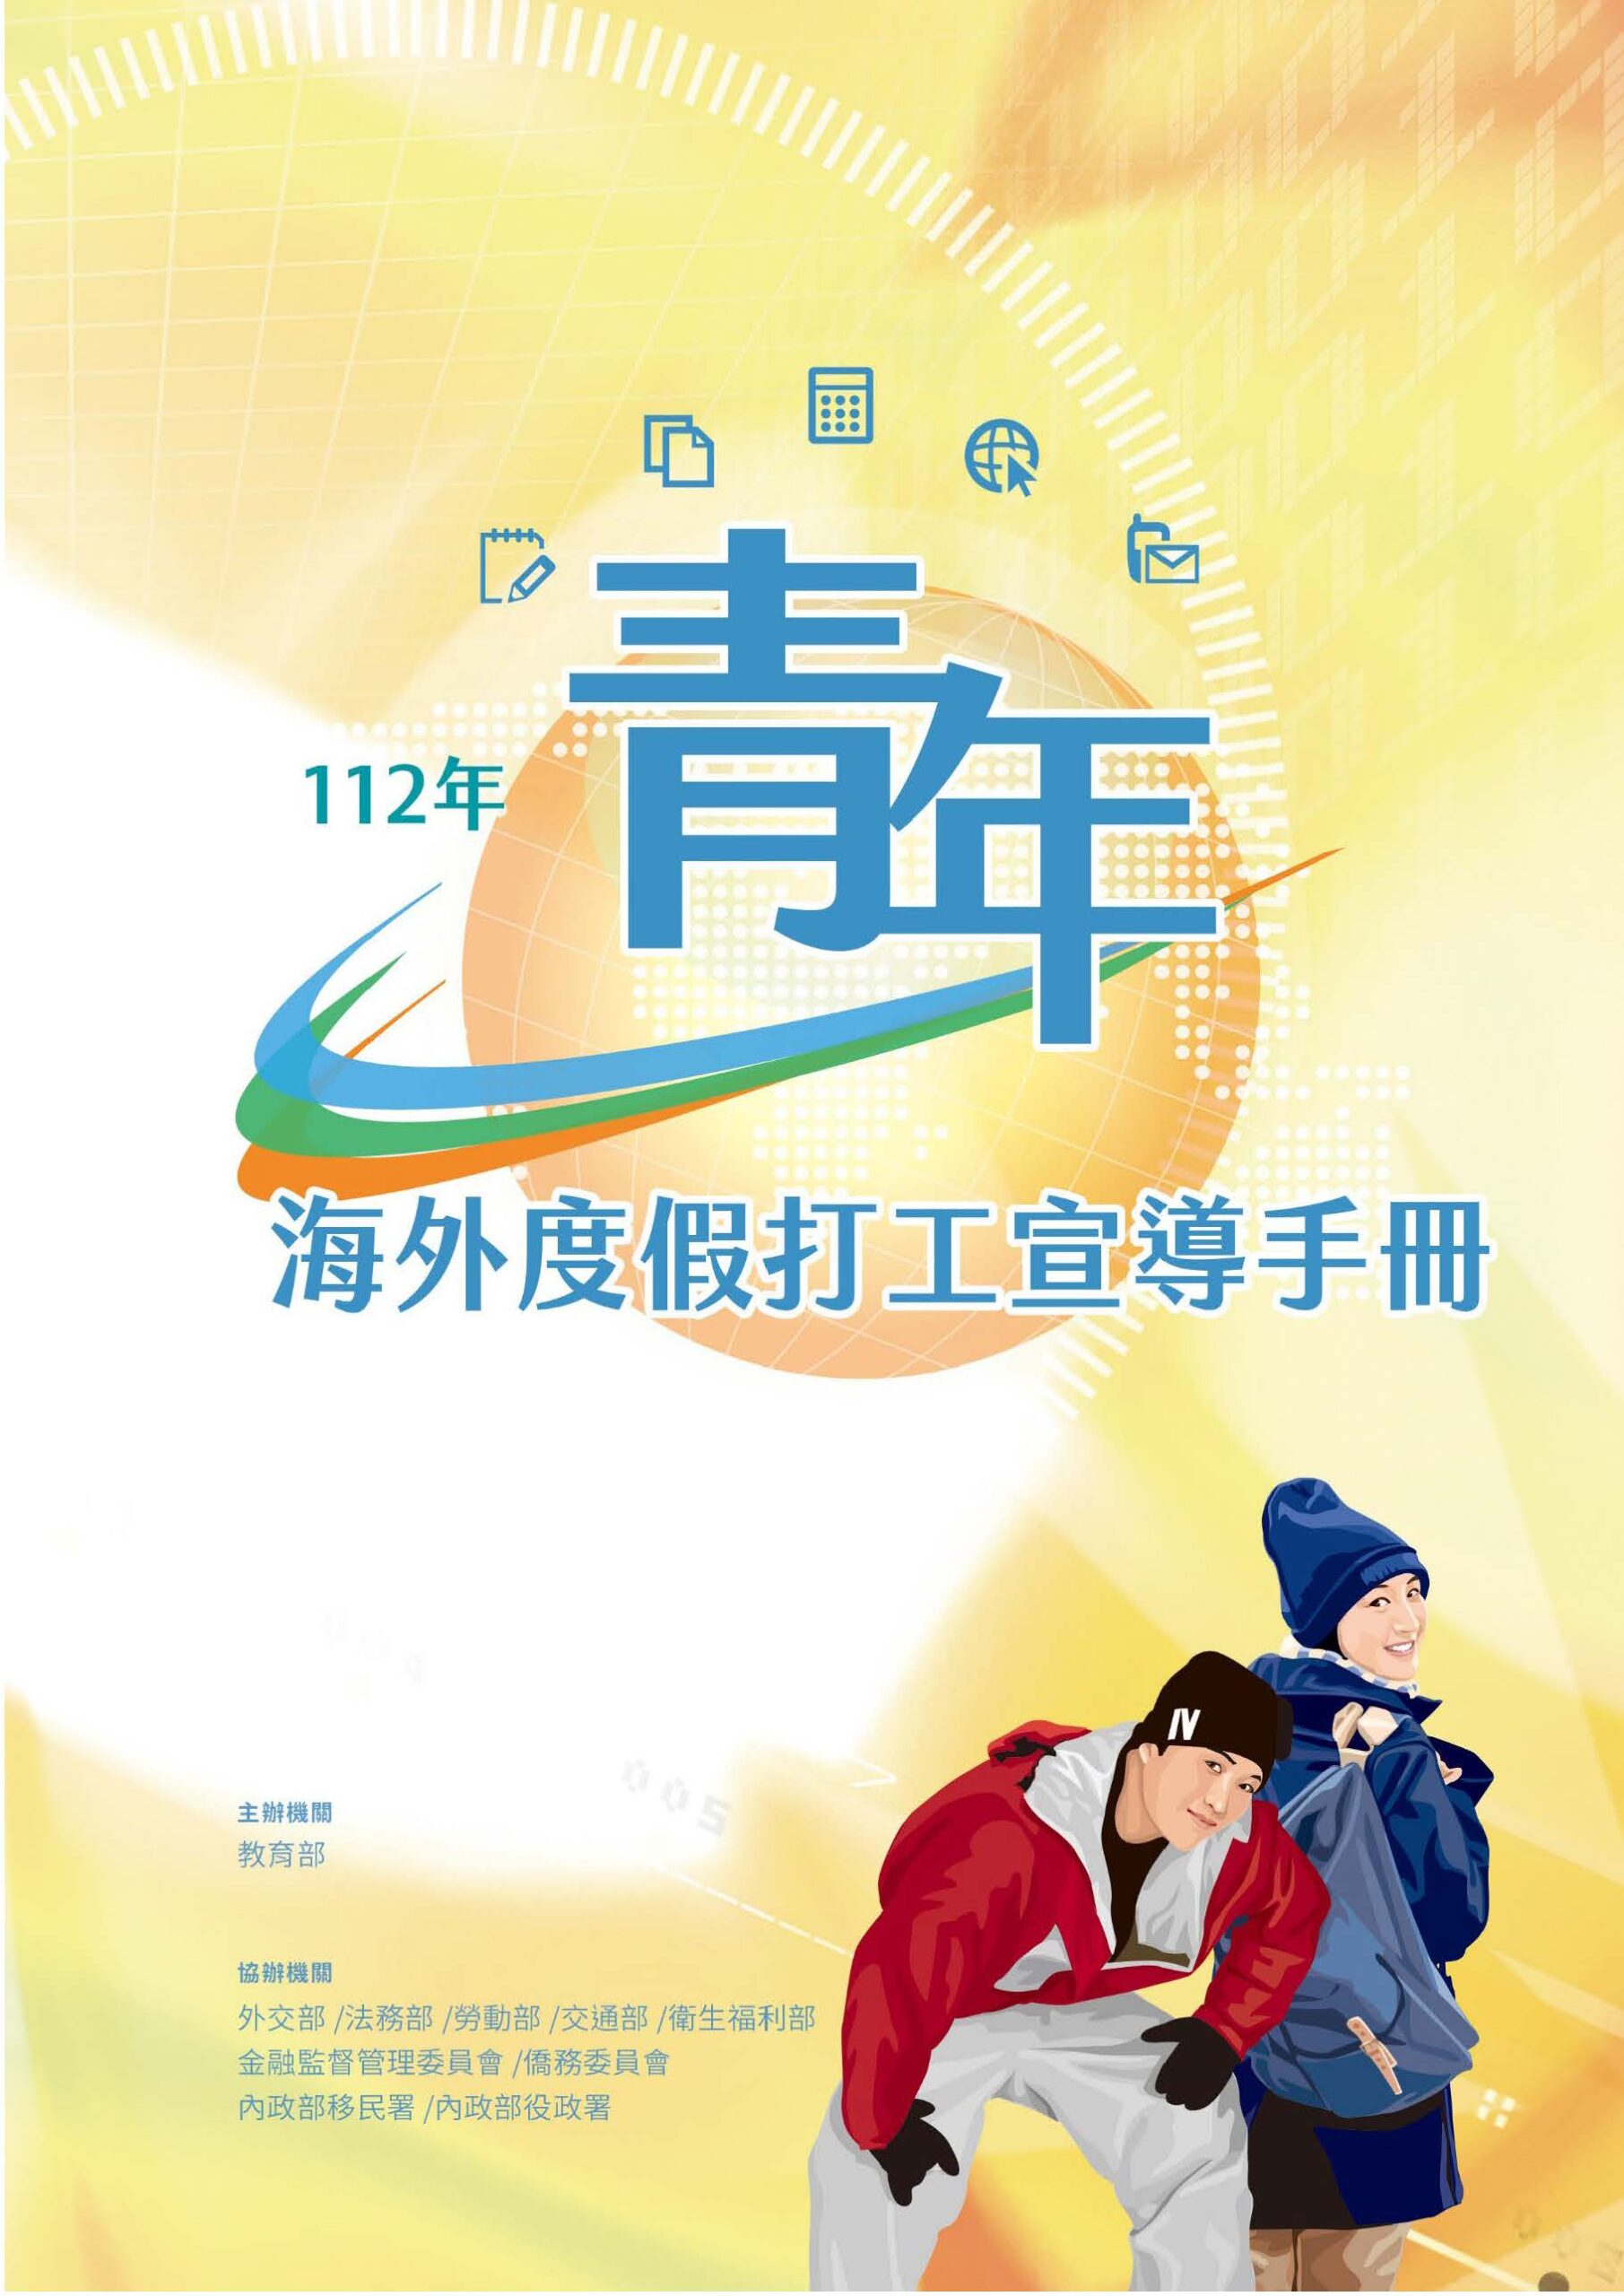 Featured image for “112年青年海外度假打工宣導手冊”